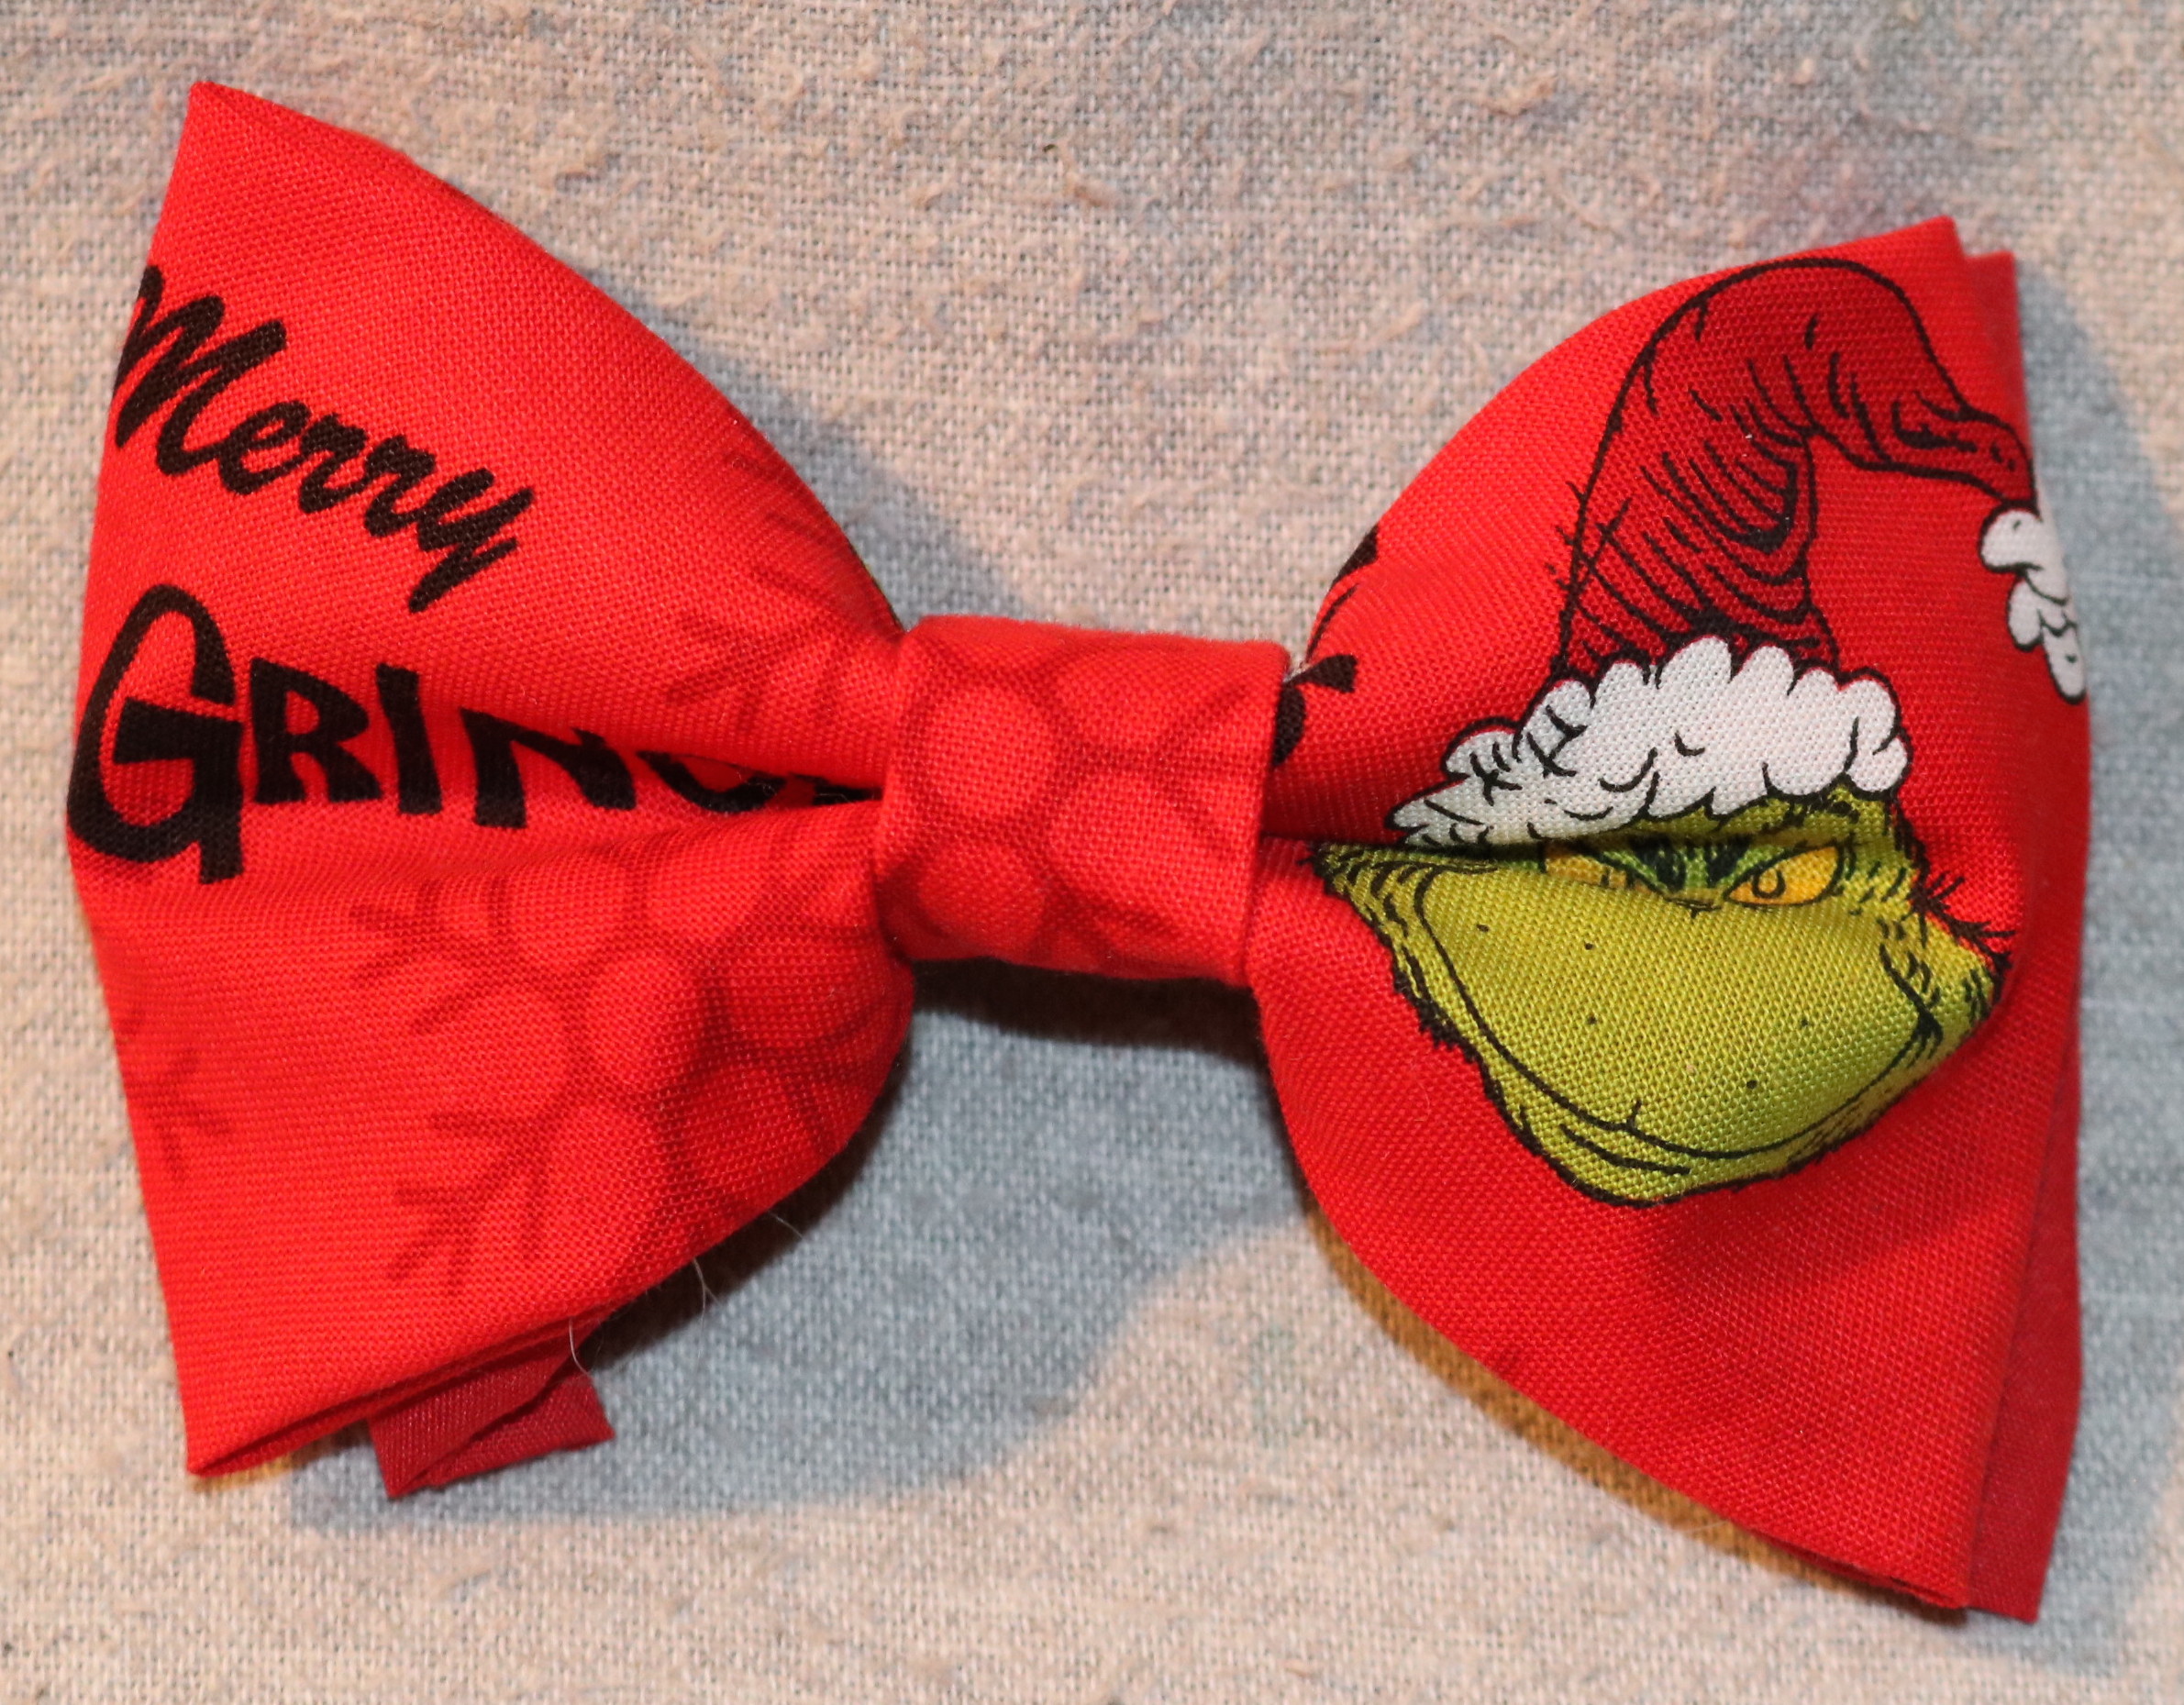 Dr UNWORN Seuss How The Grinch Stole Christmas Costume Grinch Bow Tie